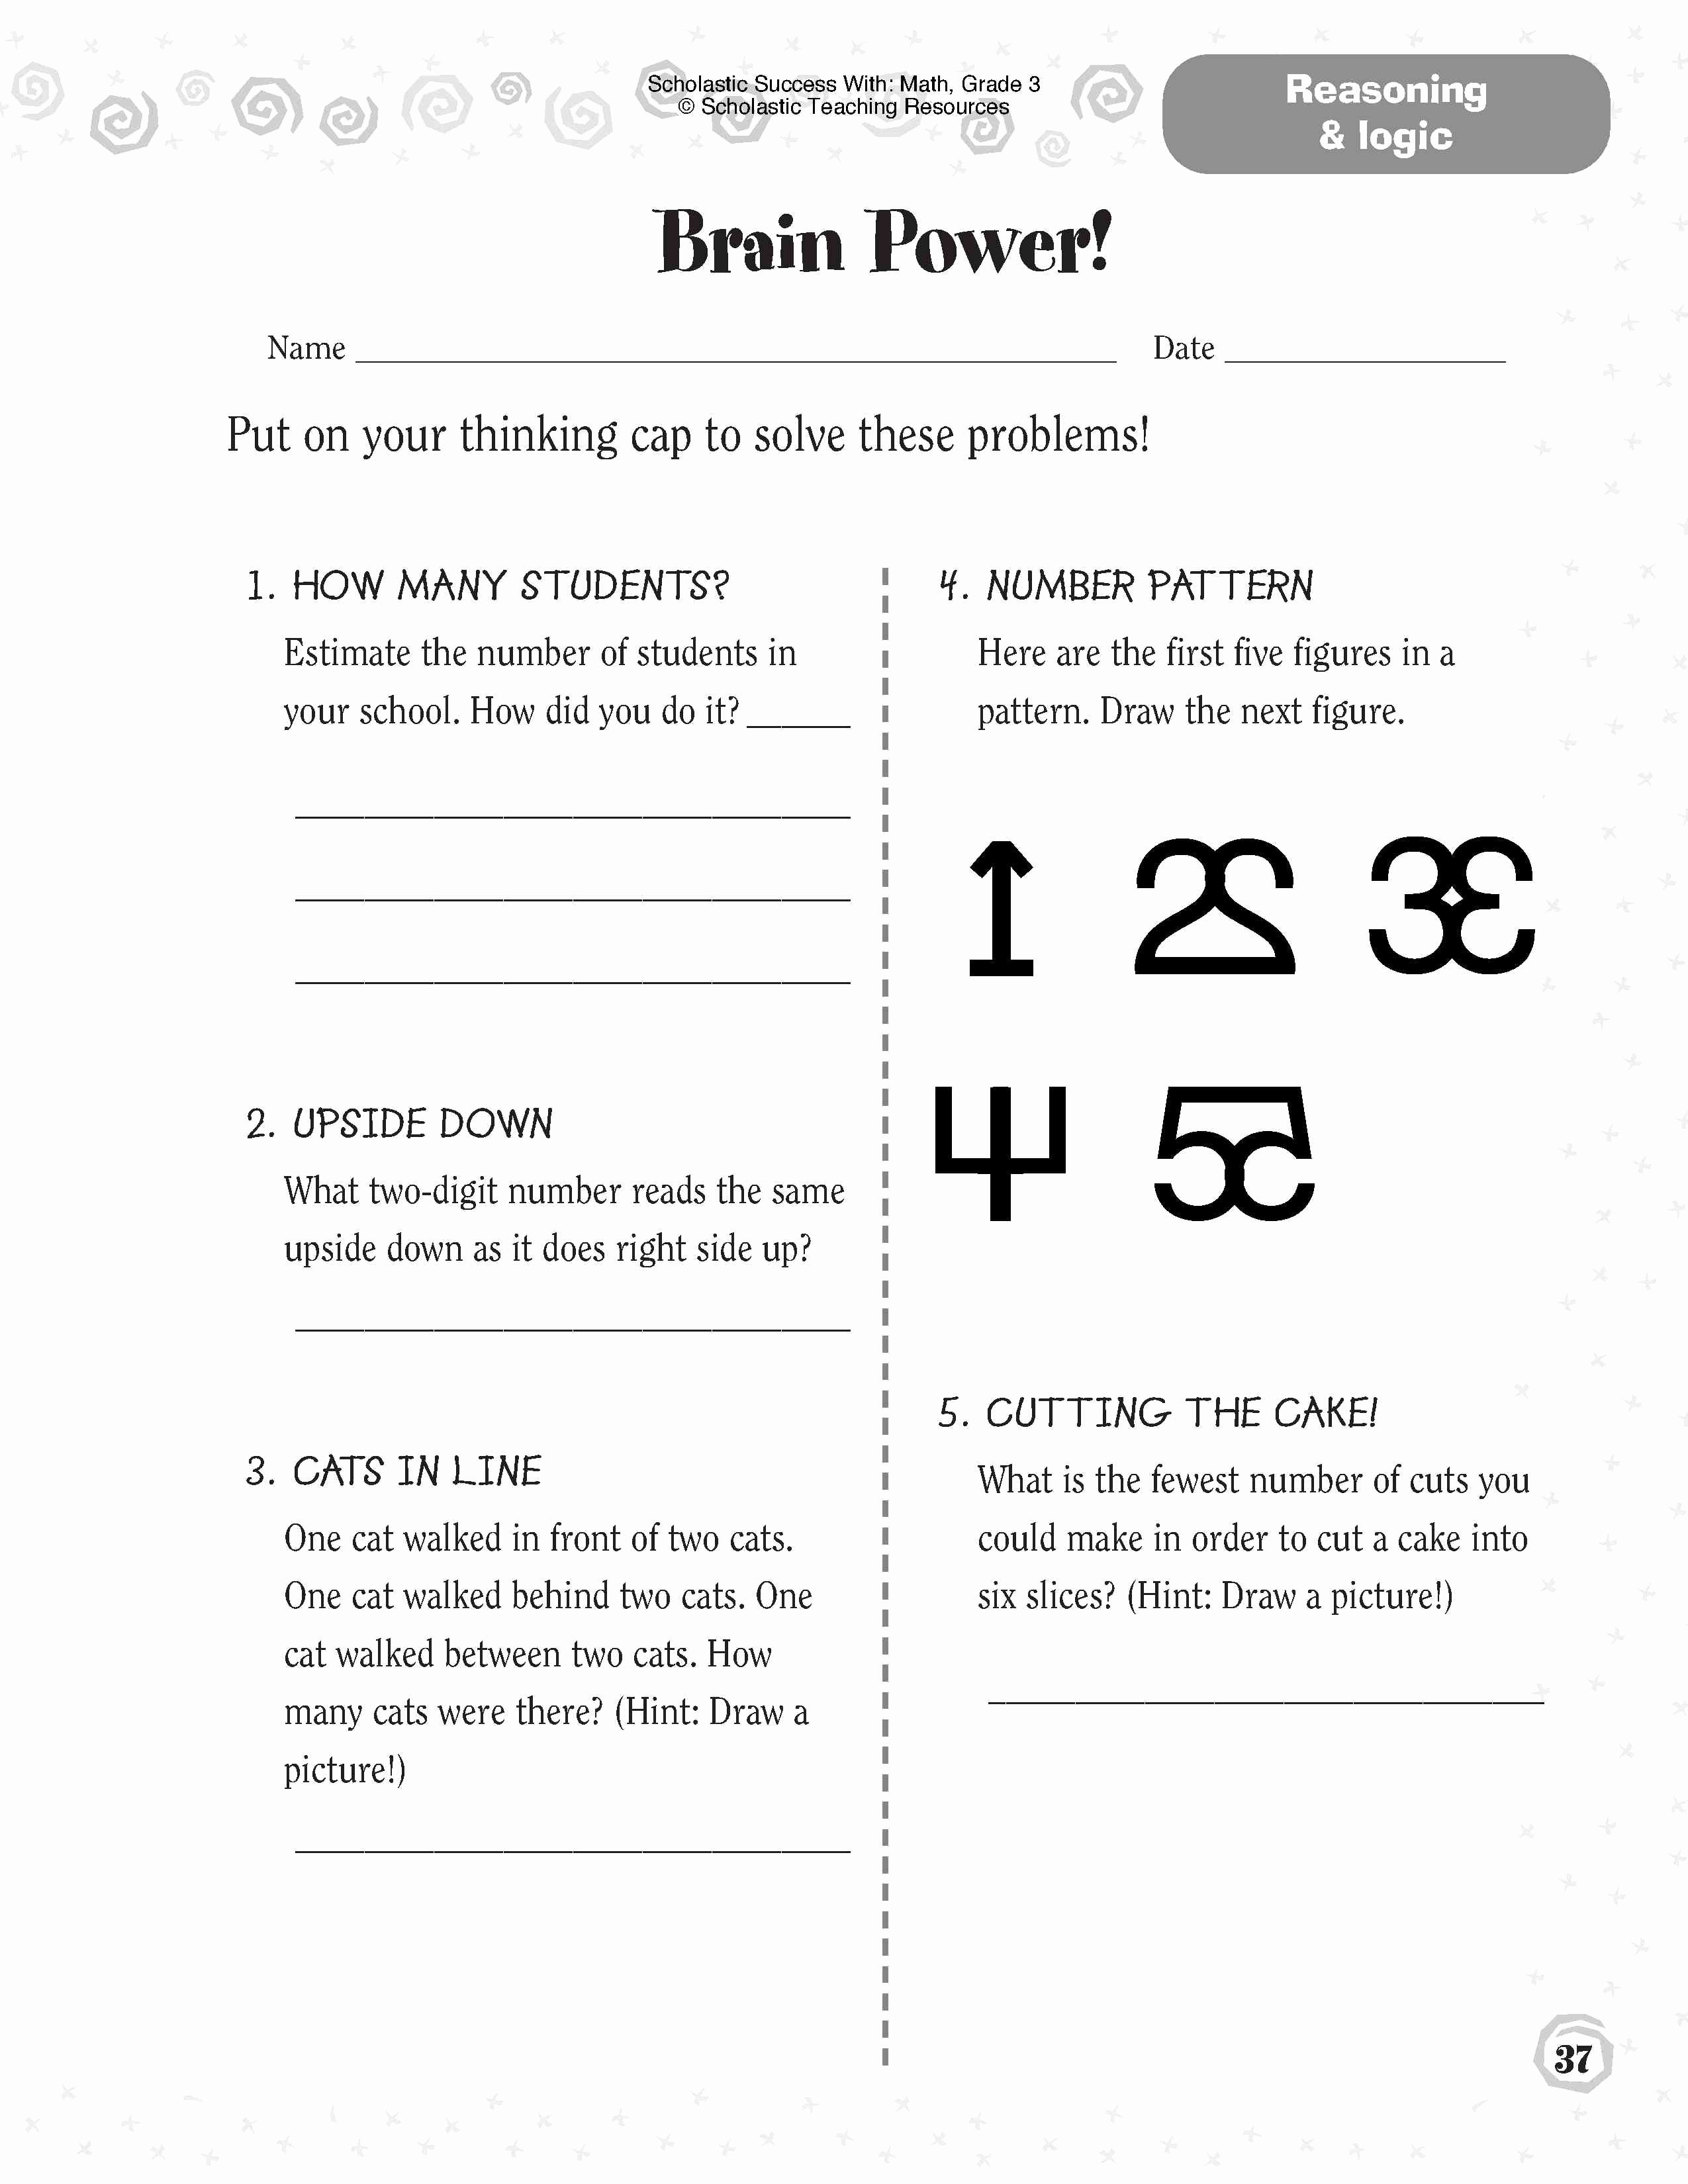 Critical Thinking Skills Worksheet Best Of Critical Thinking Activities for Fast Finishers and Beyond